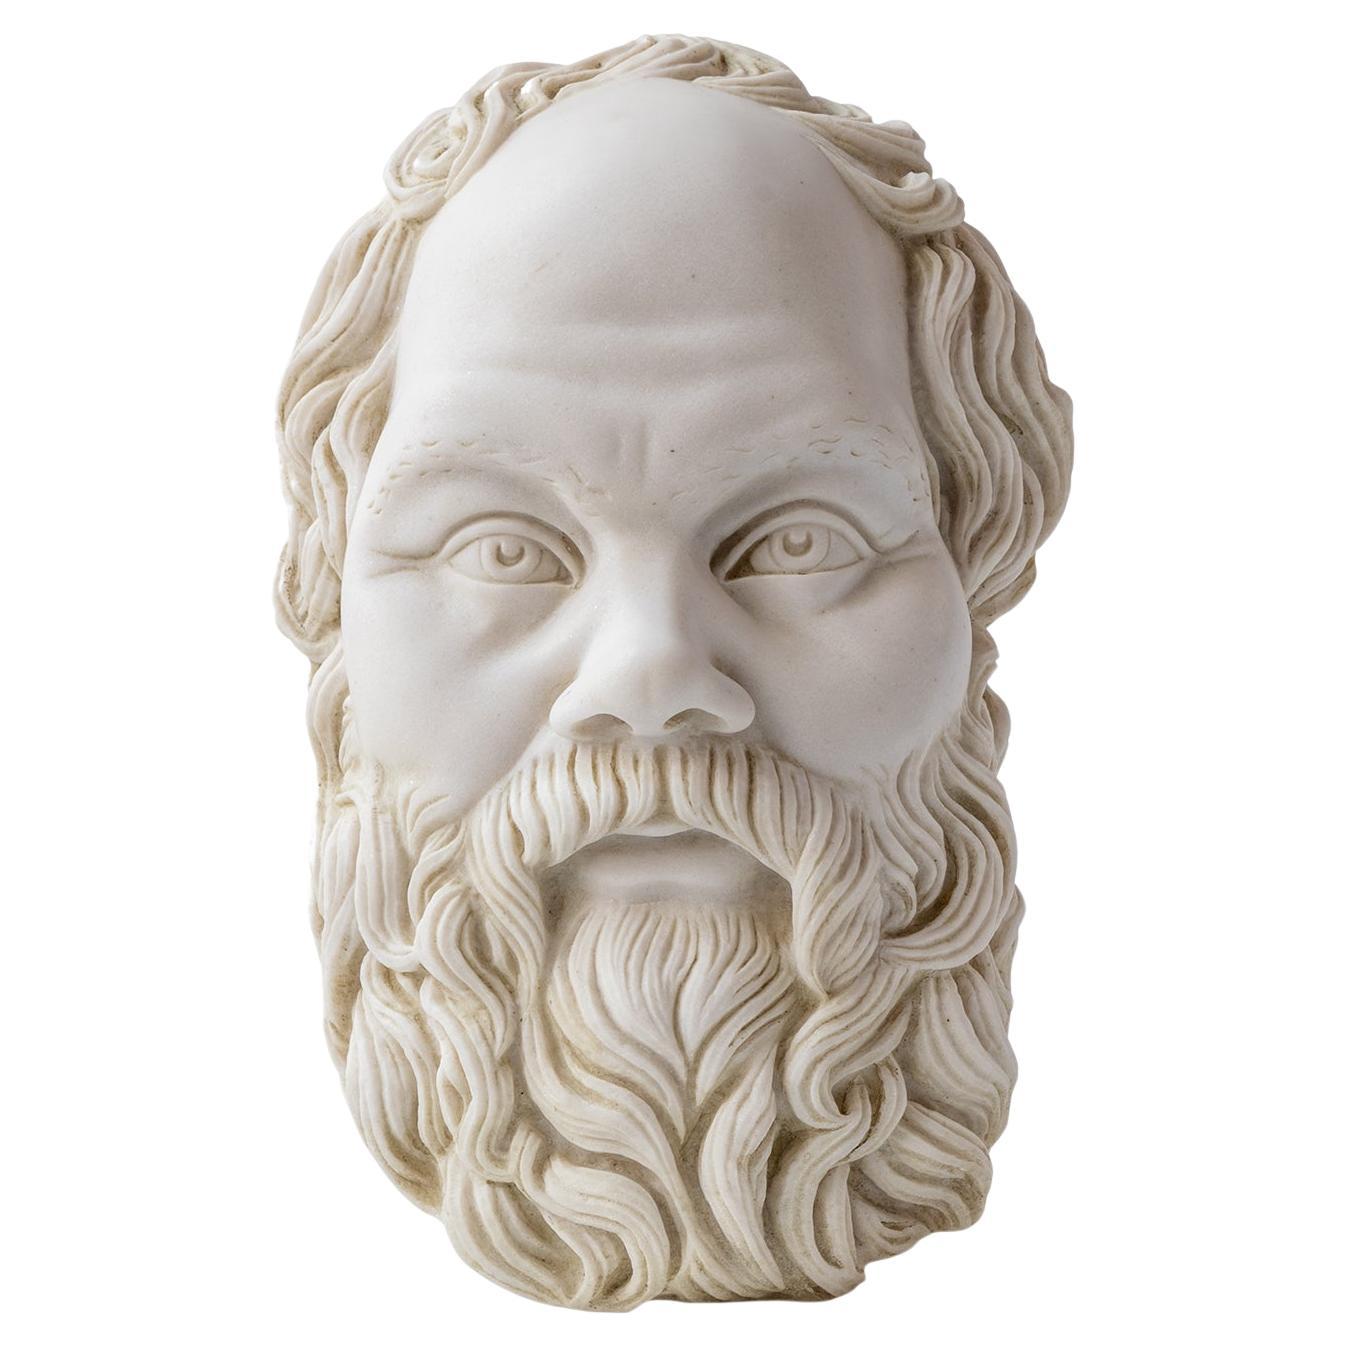 Socrates Mask Made with Compressed Marble Powder 'Ephesus Museum'